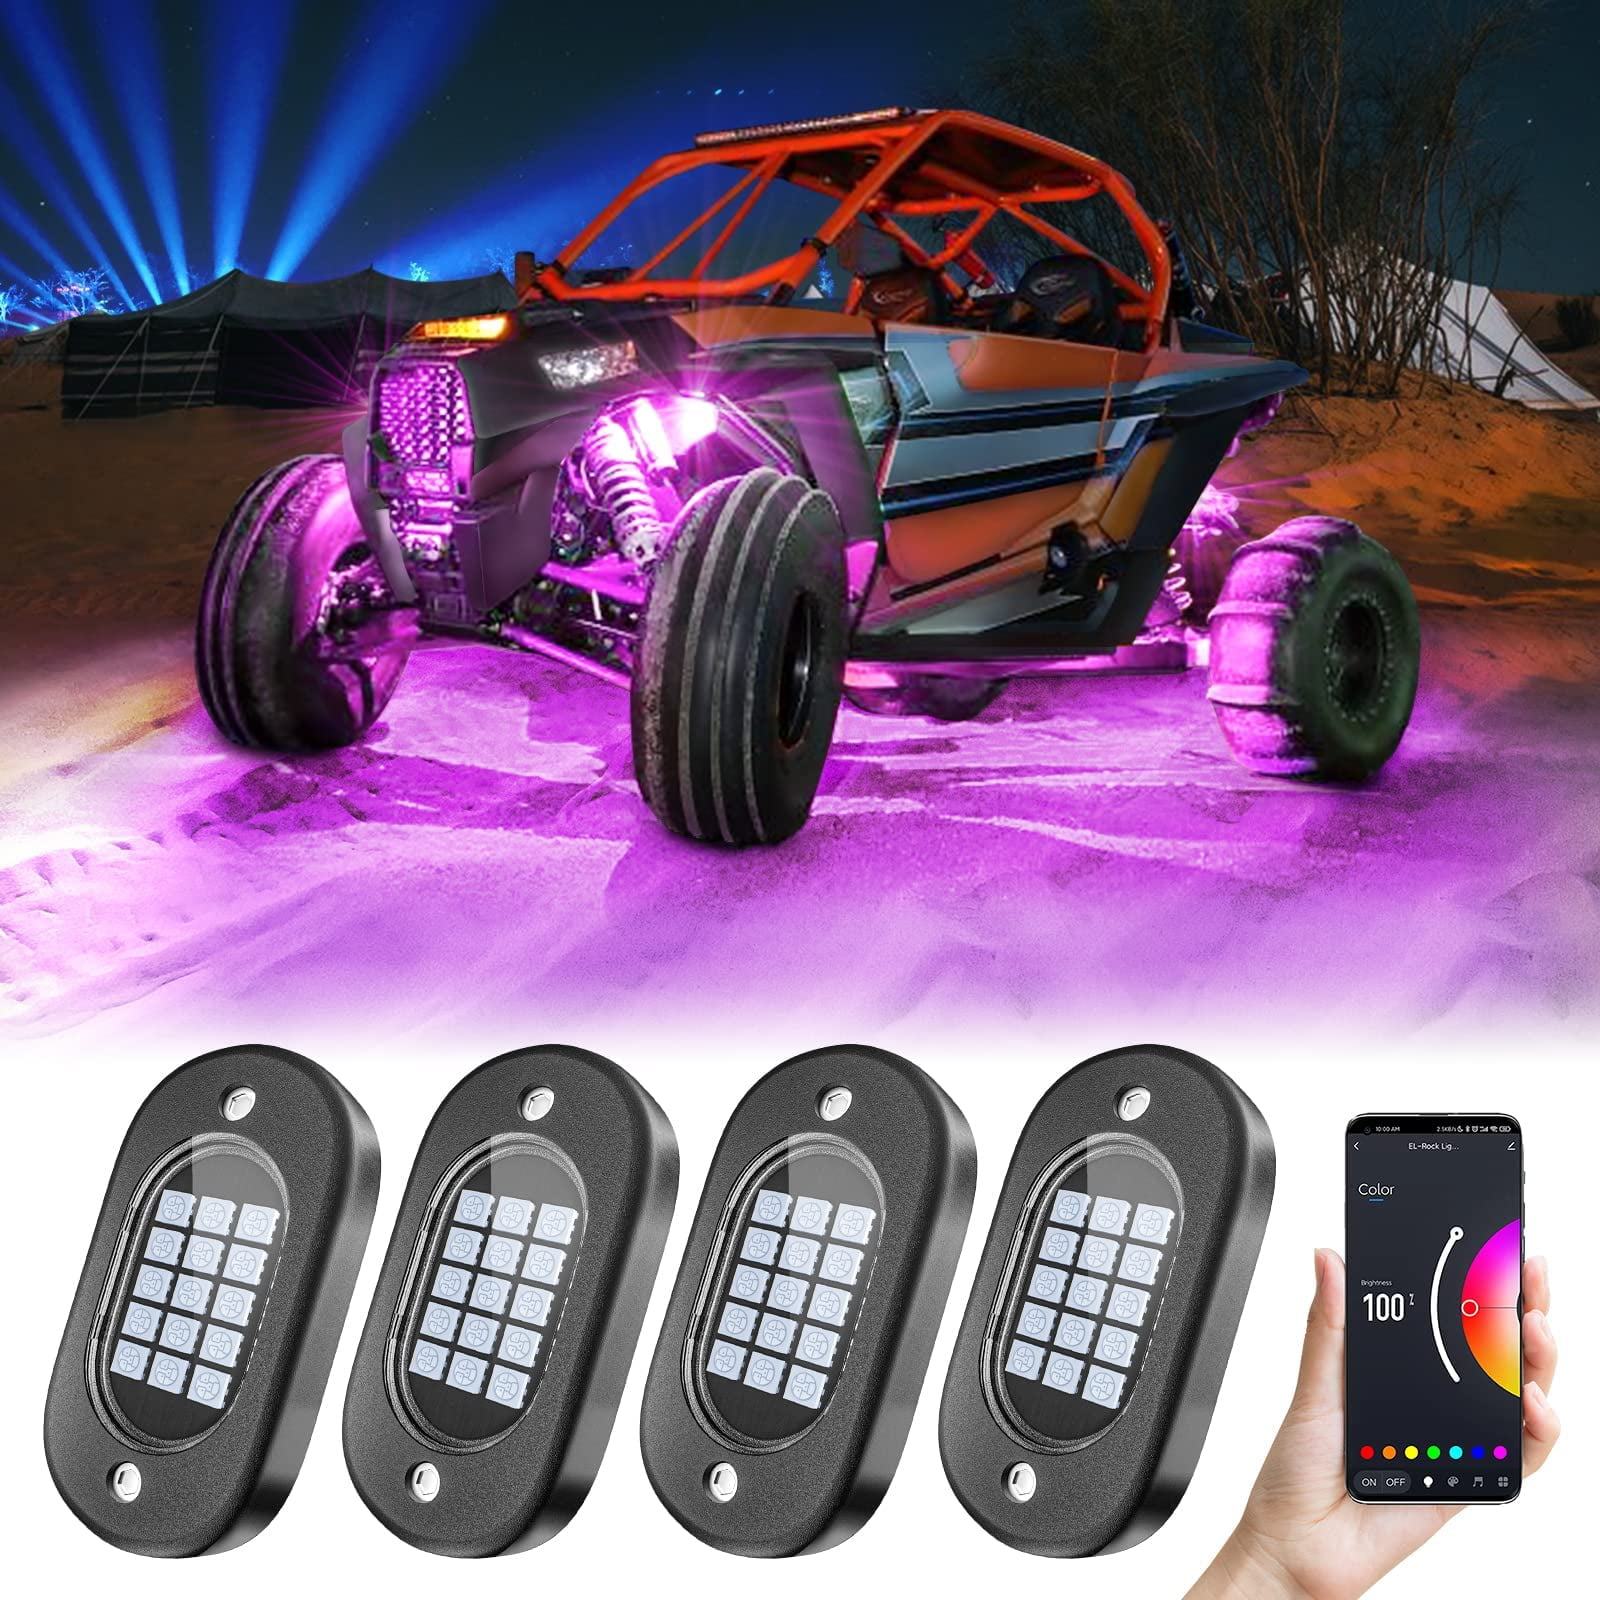  SWATOW INDUSTRIES RGB Rock Lights Bluetooth App/Remote Control  Underglow Multicolor Neon Lights RGB LED Rock Light Kit Timing Music Mode  Wheel Well Lights for UTV RZR Side by Side ATV Jeep